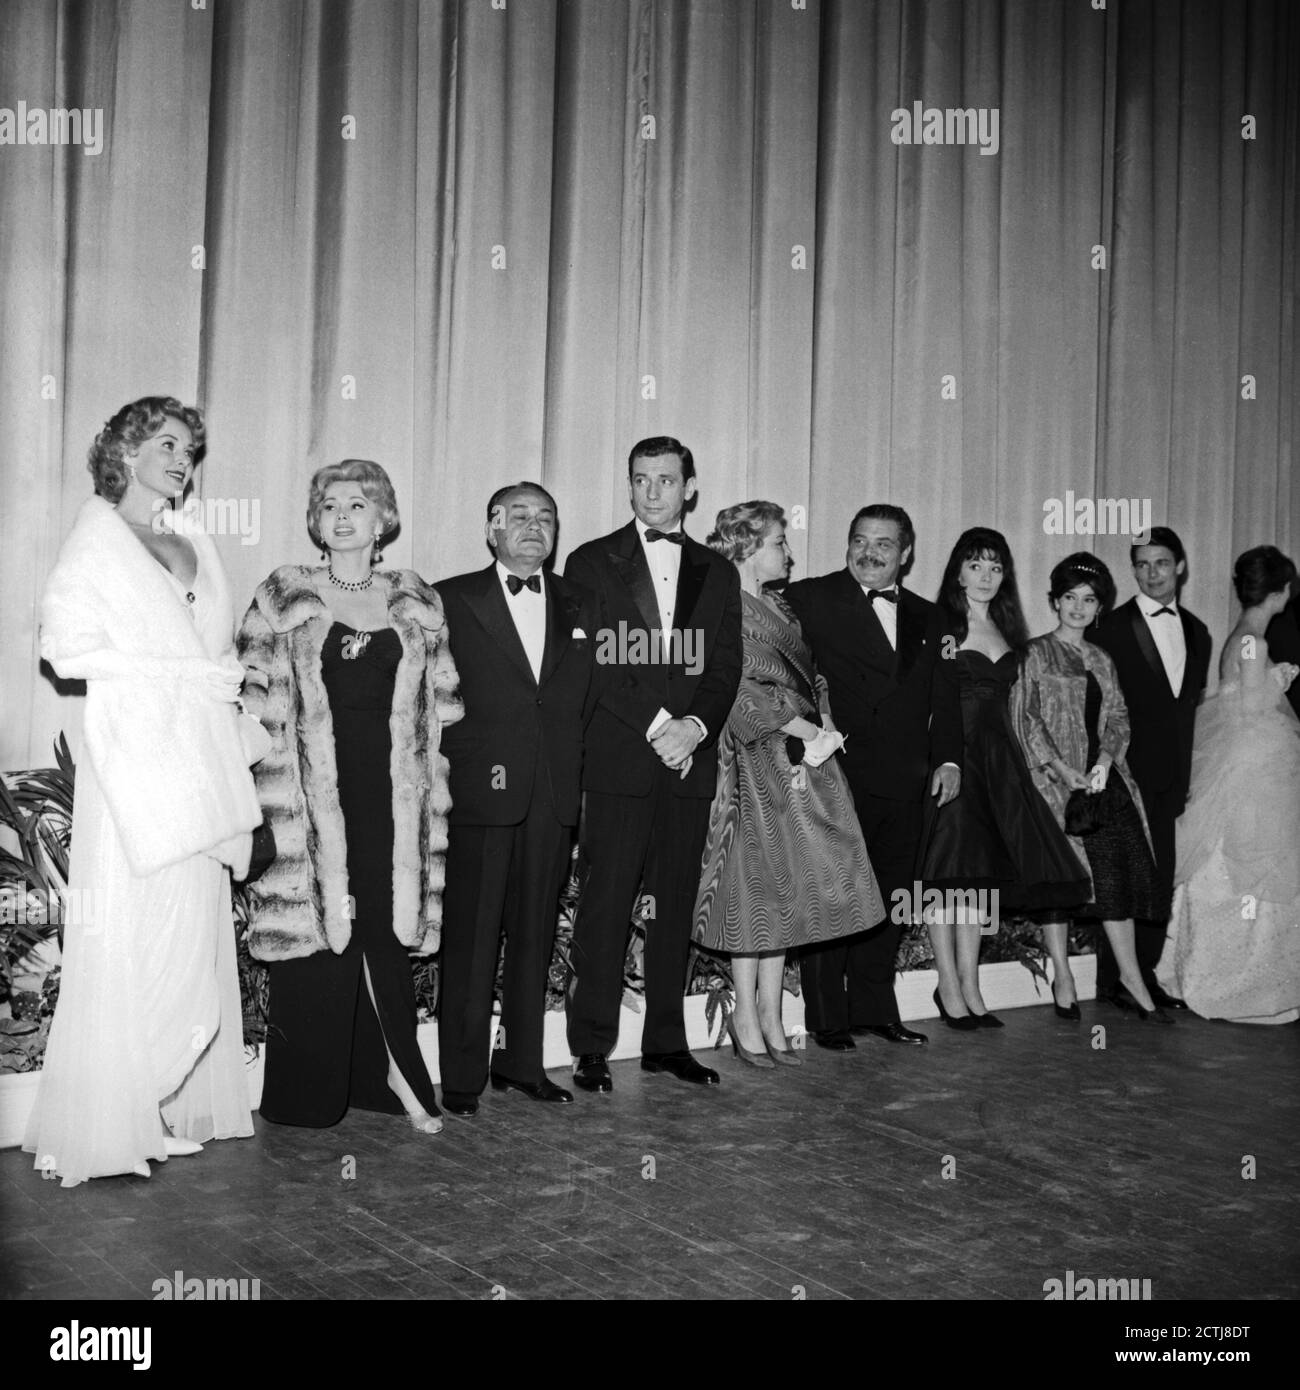 Rhonda Fleming, Zsa Zsa Gabor, Edward G. Robinson, Yves Montand, Simone  Signoret, Folco Lulli, Juliette Gréco, Pascale Petit, Anne-Marie Petit and  Jacques Charrier at 12th Cannes Film Festival (1959) --- Cannes (Francia),